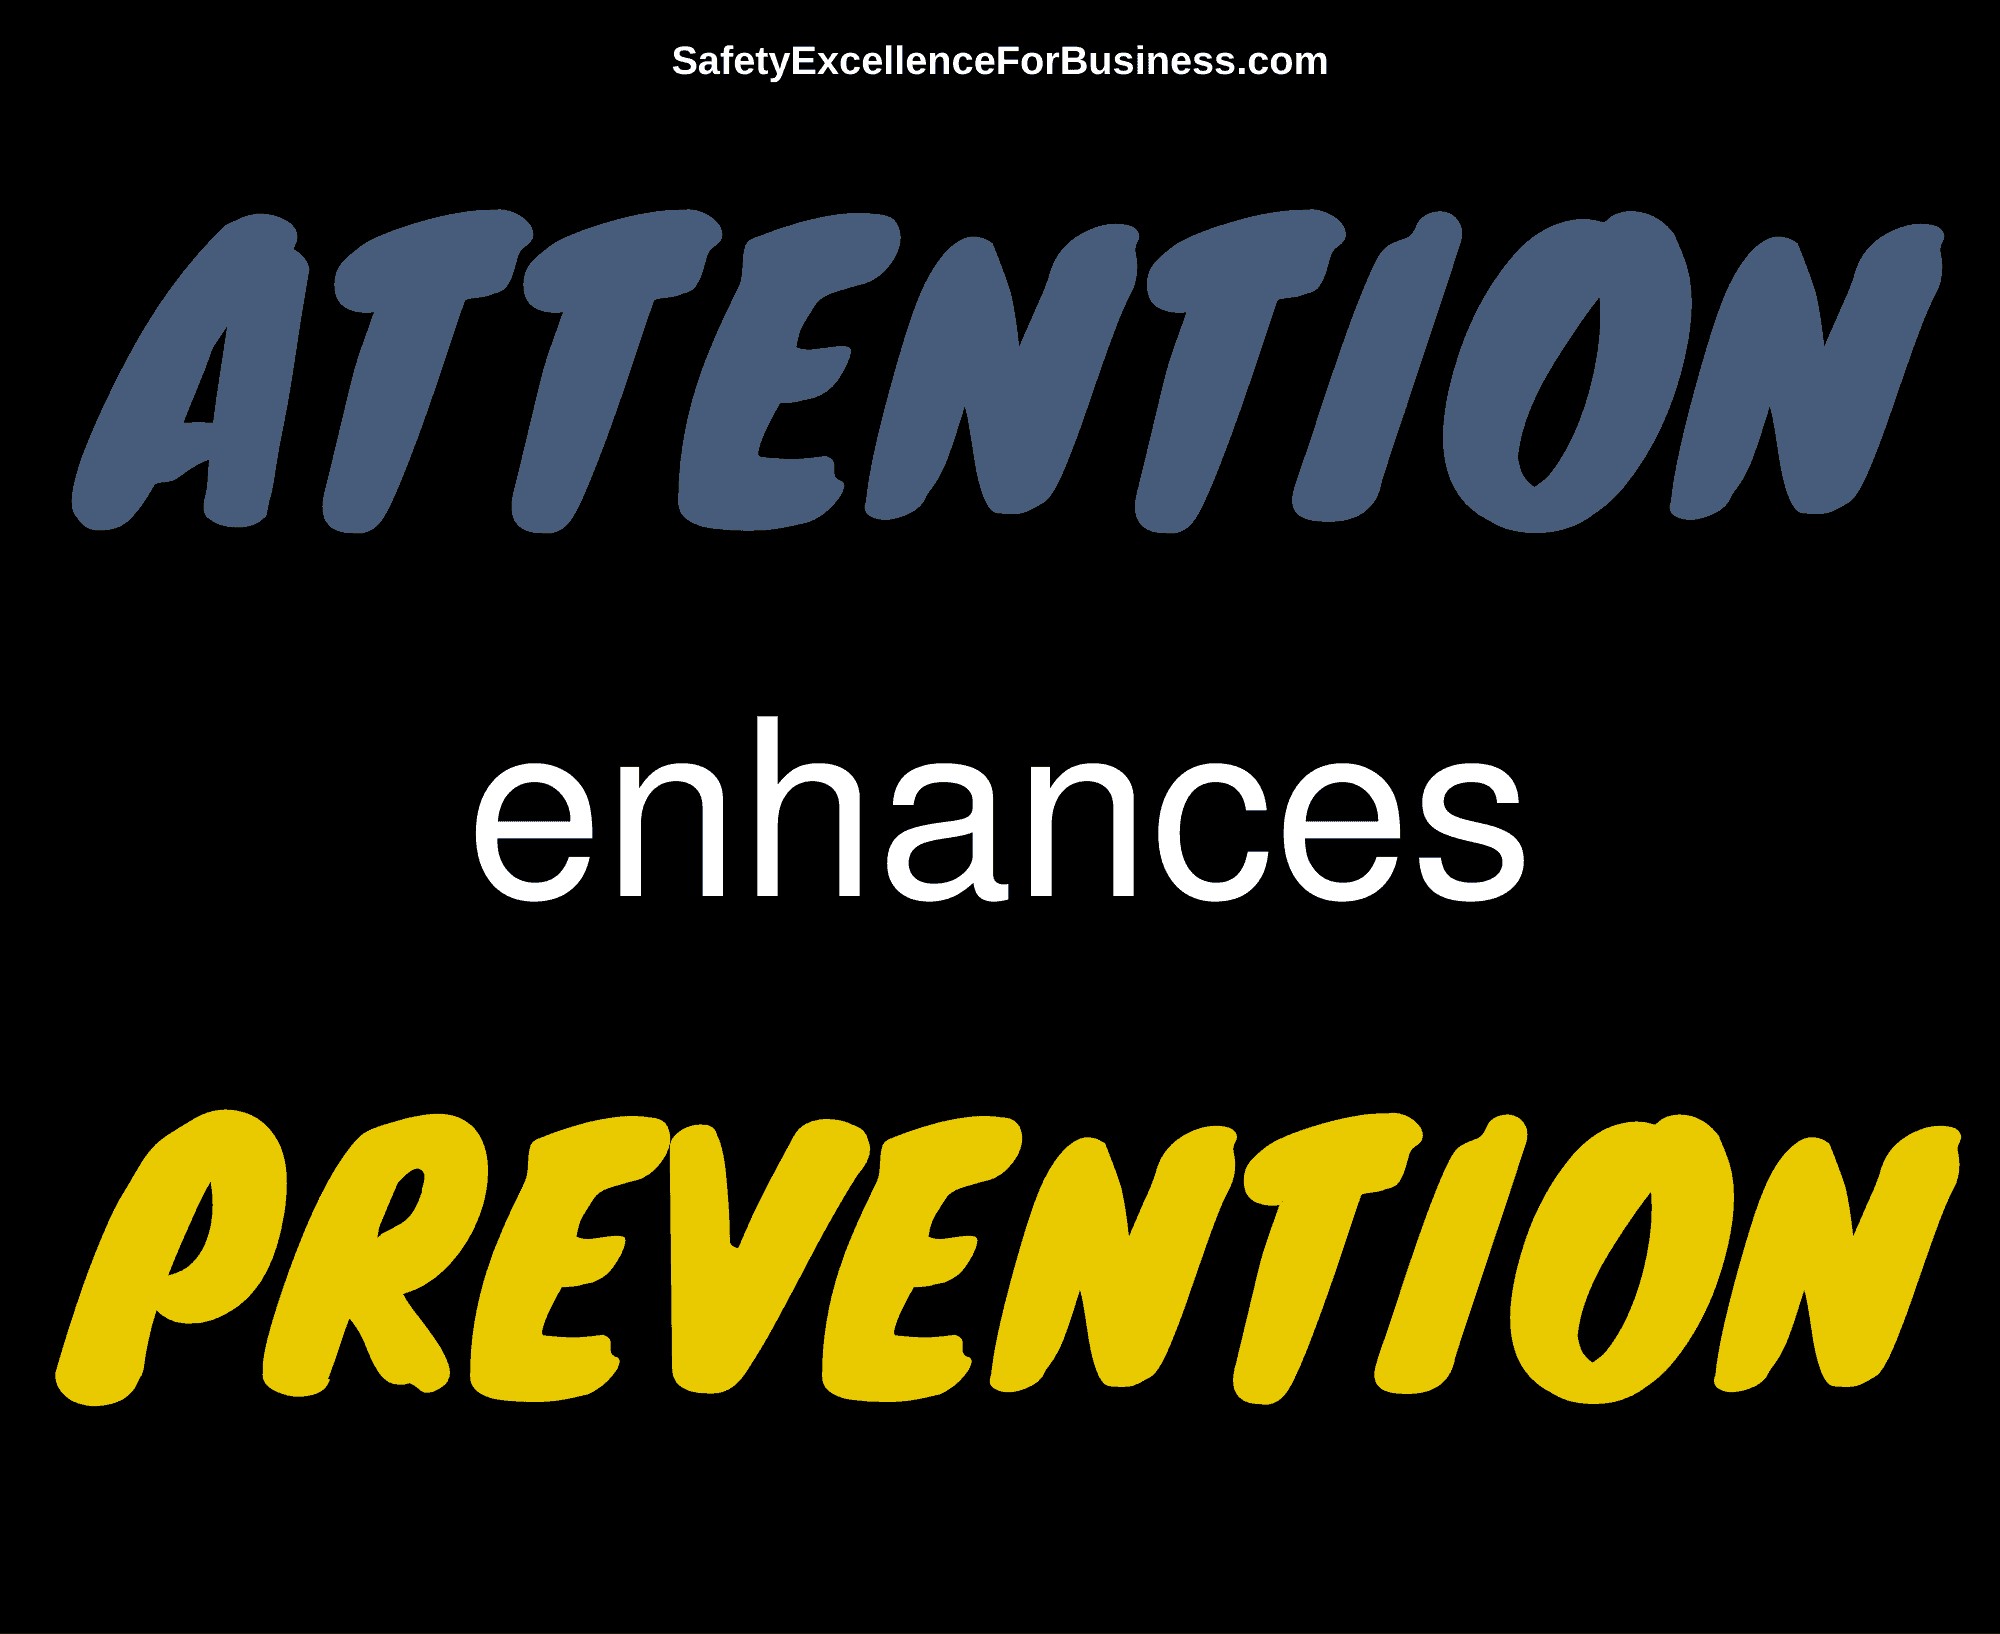 pay attention to safety at work to enhance prevention